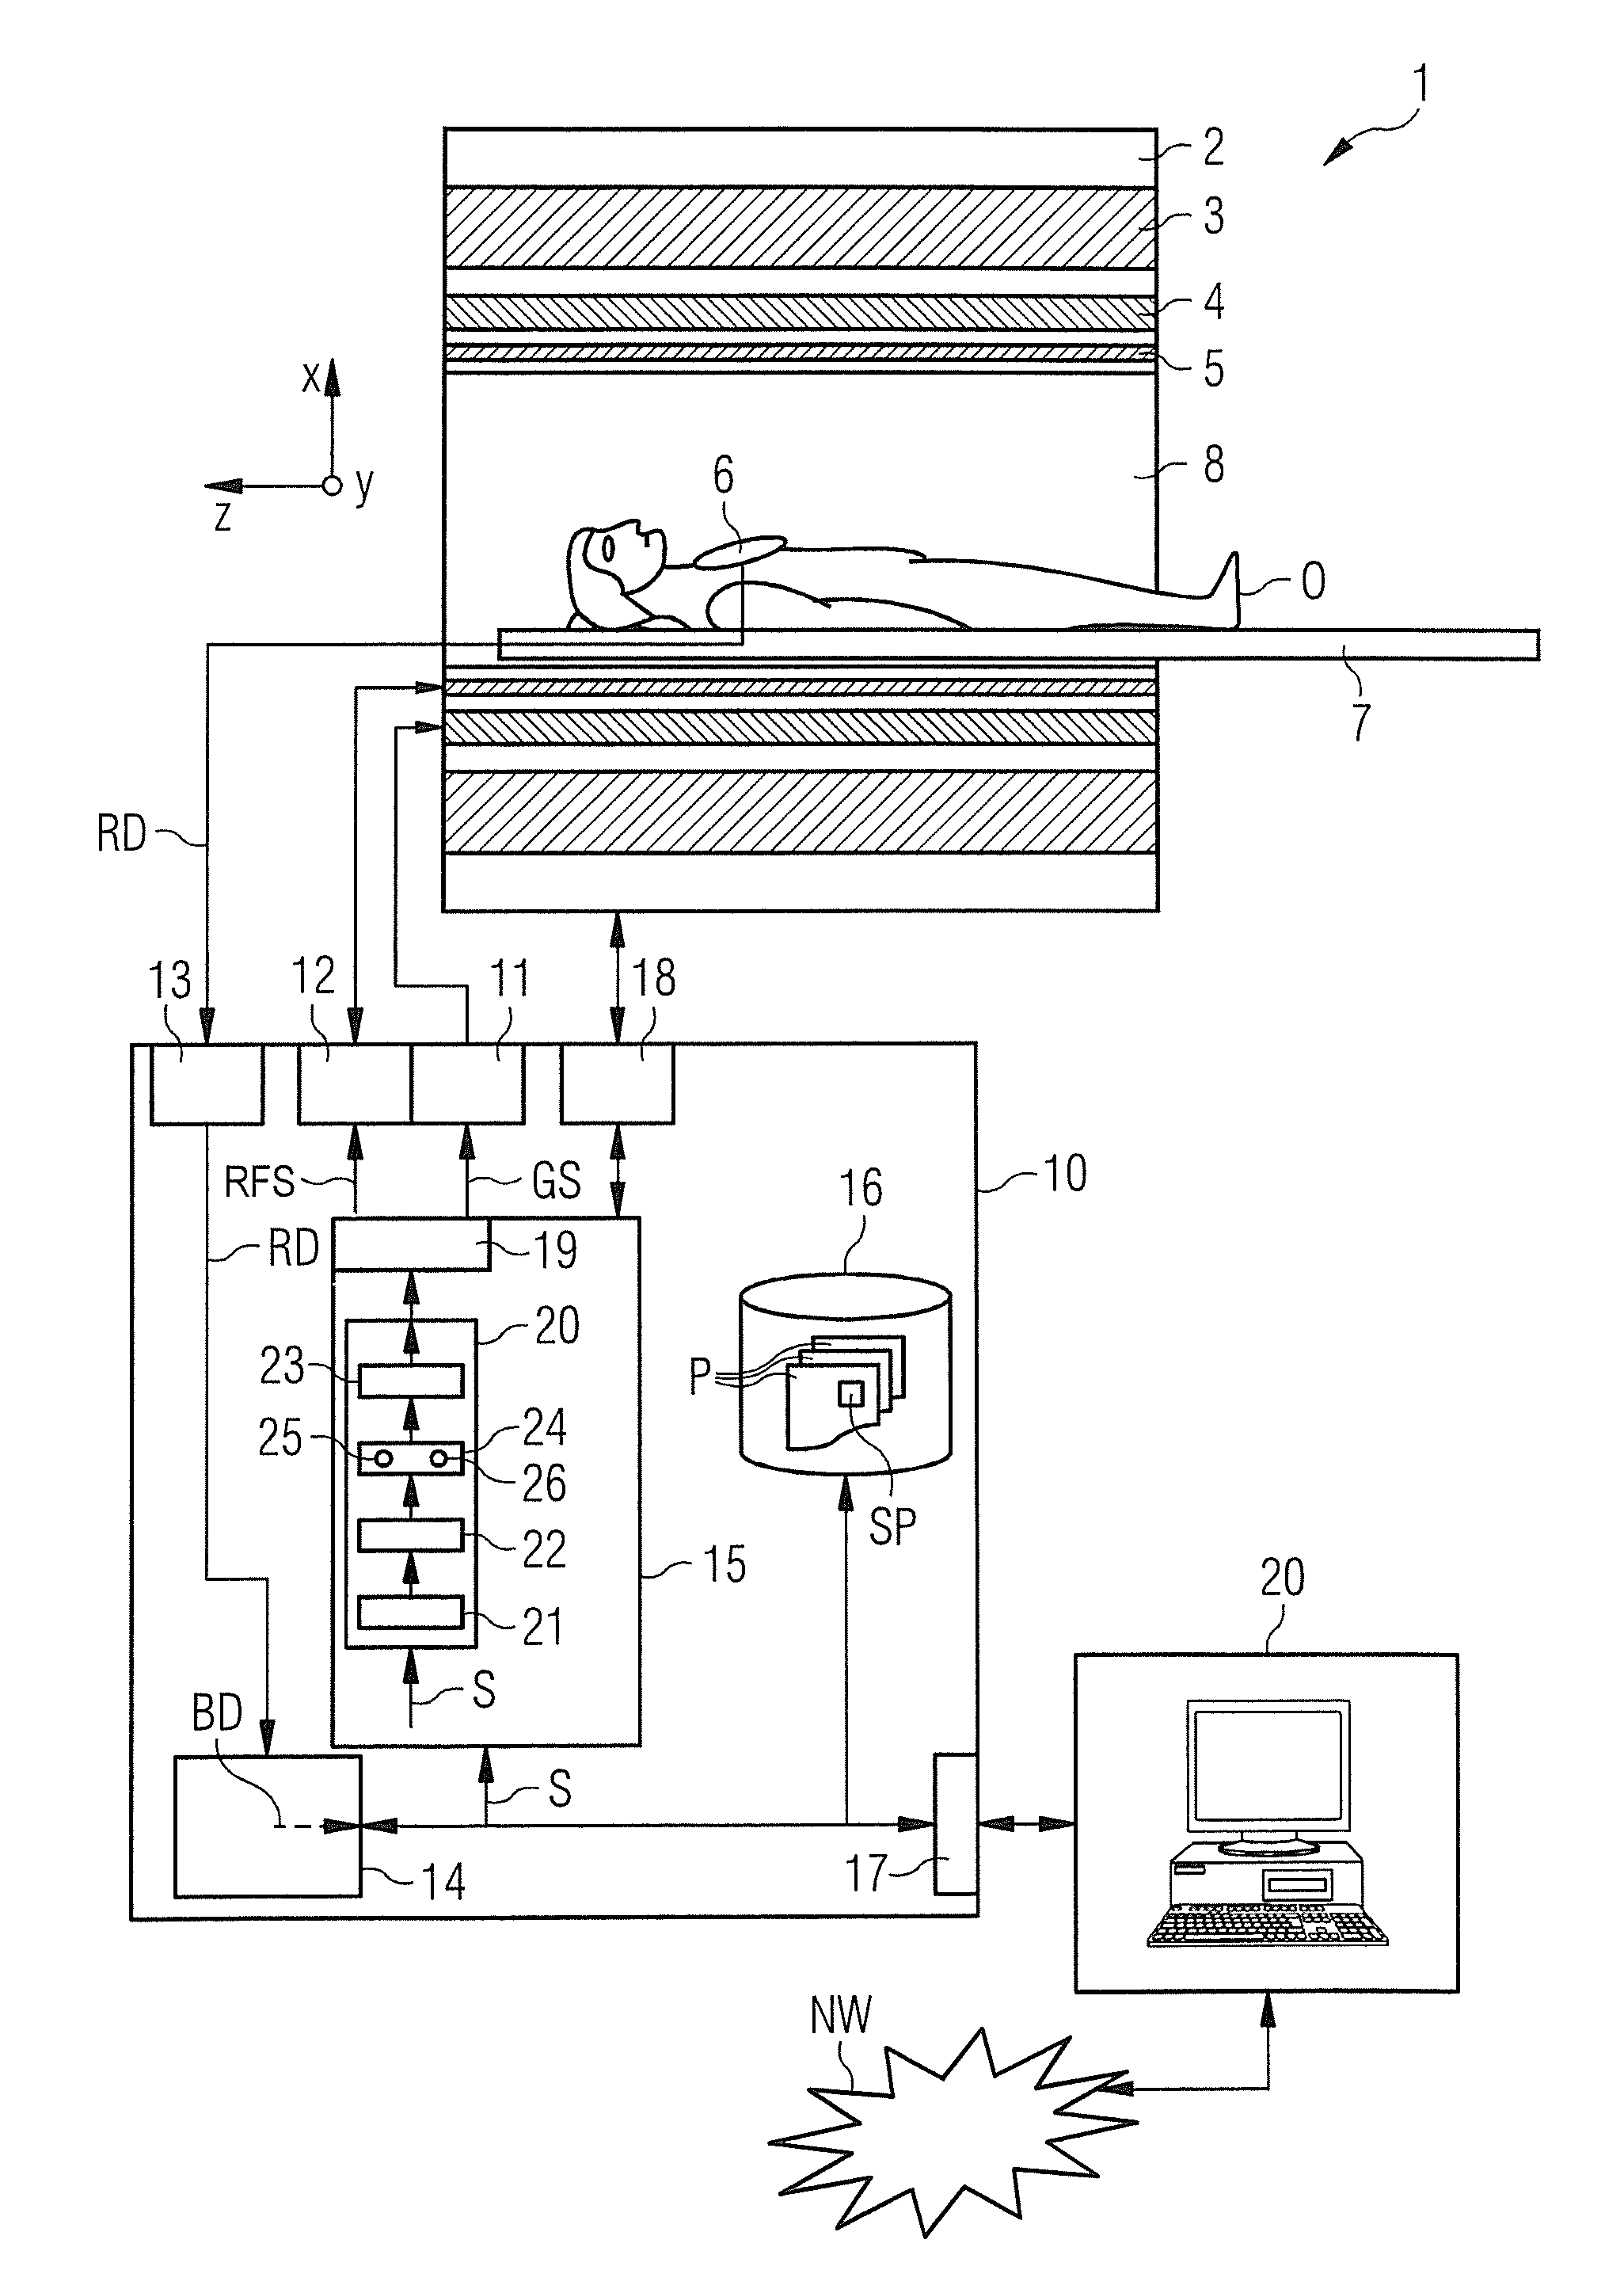 Method and apparatus control and adjustment of pulse optimization of a magnetic resonance system